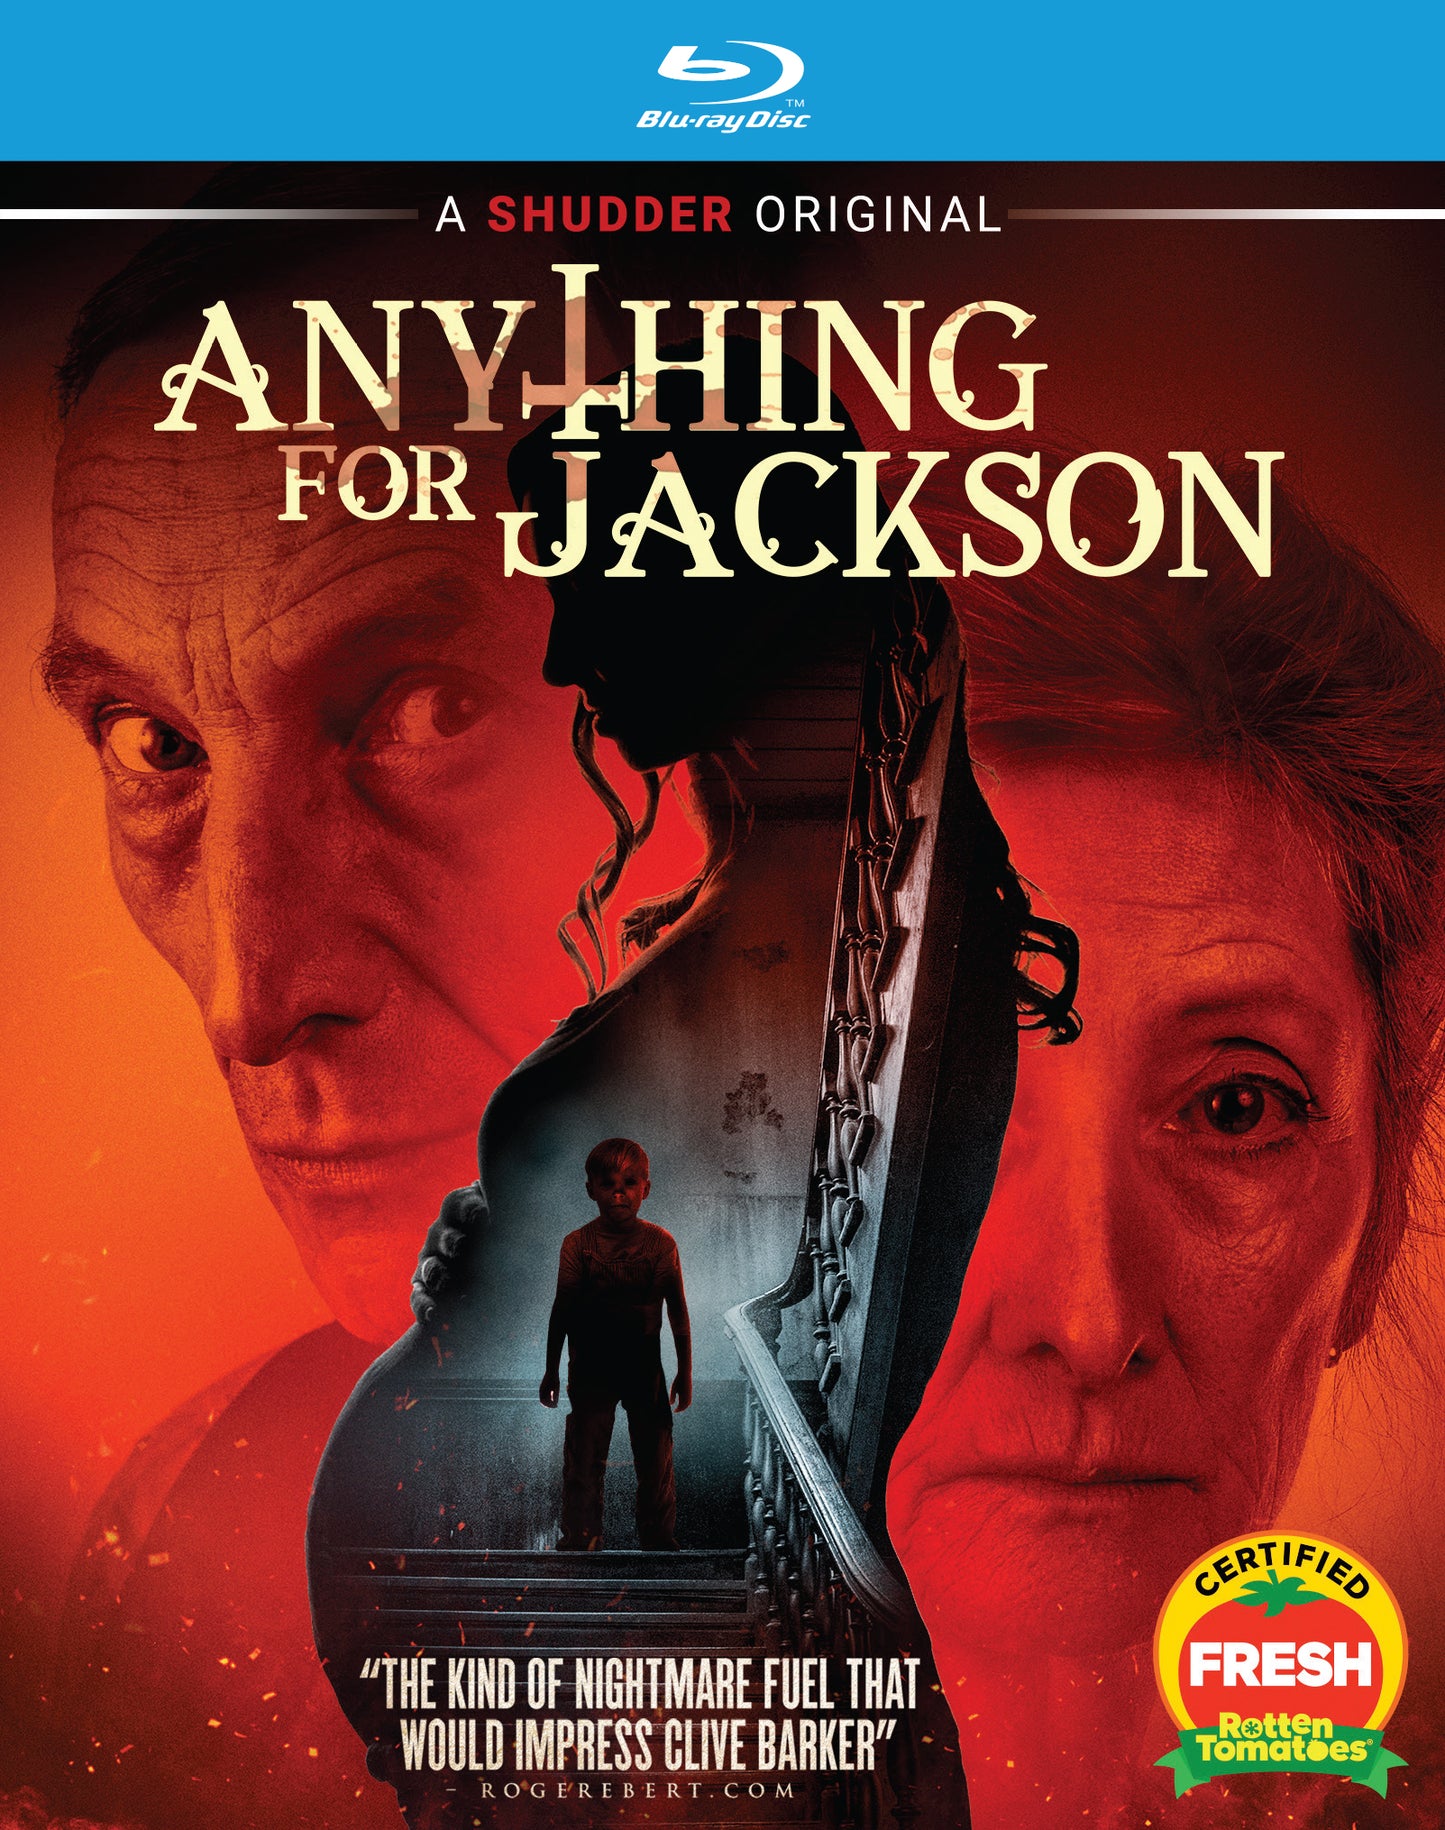 Anything for Jackson [Blu-ray] cover art